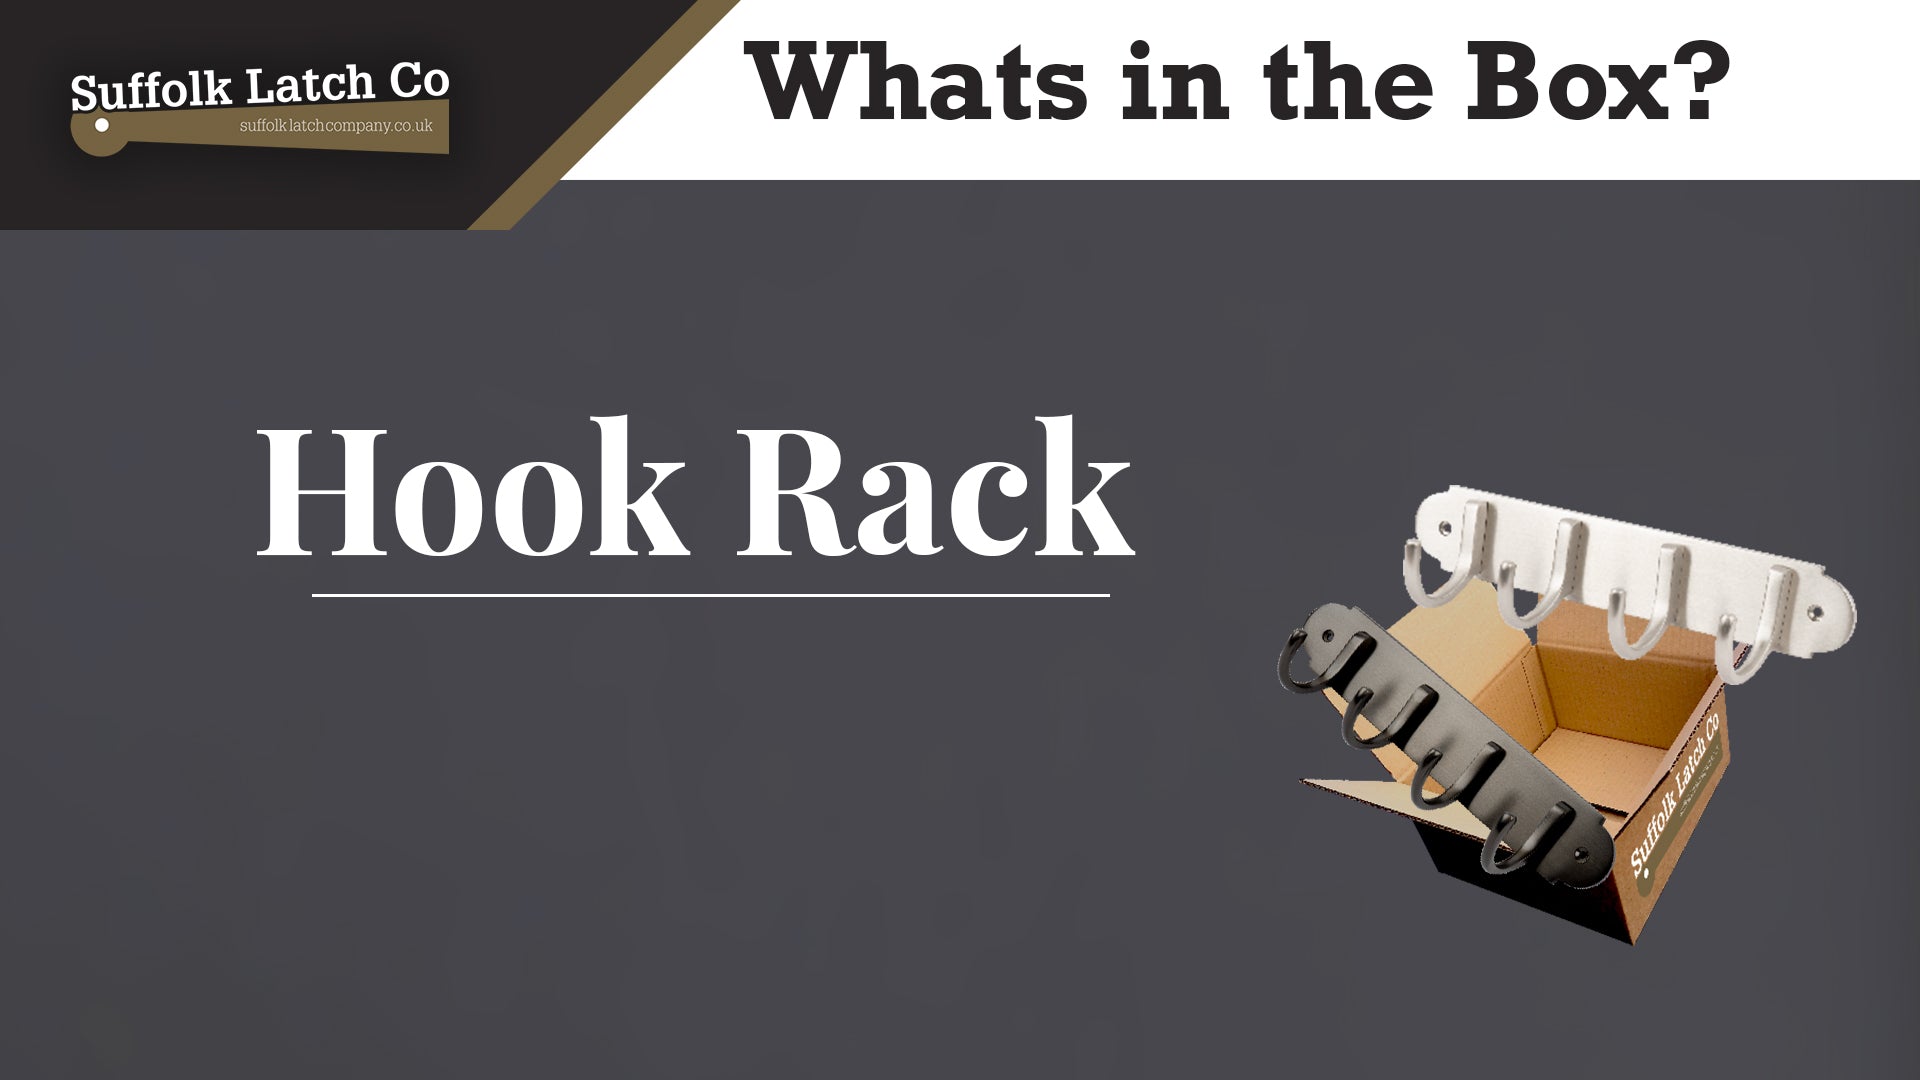 What's in the Box: Hook Rack